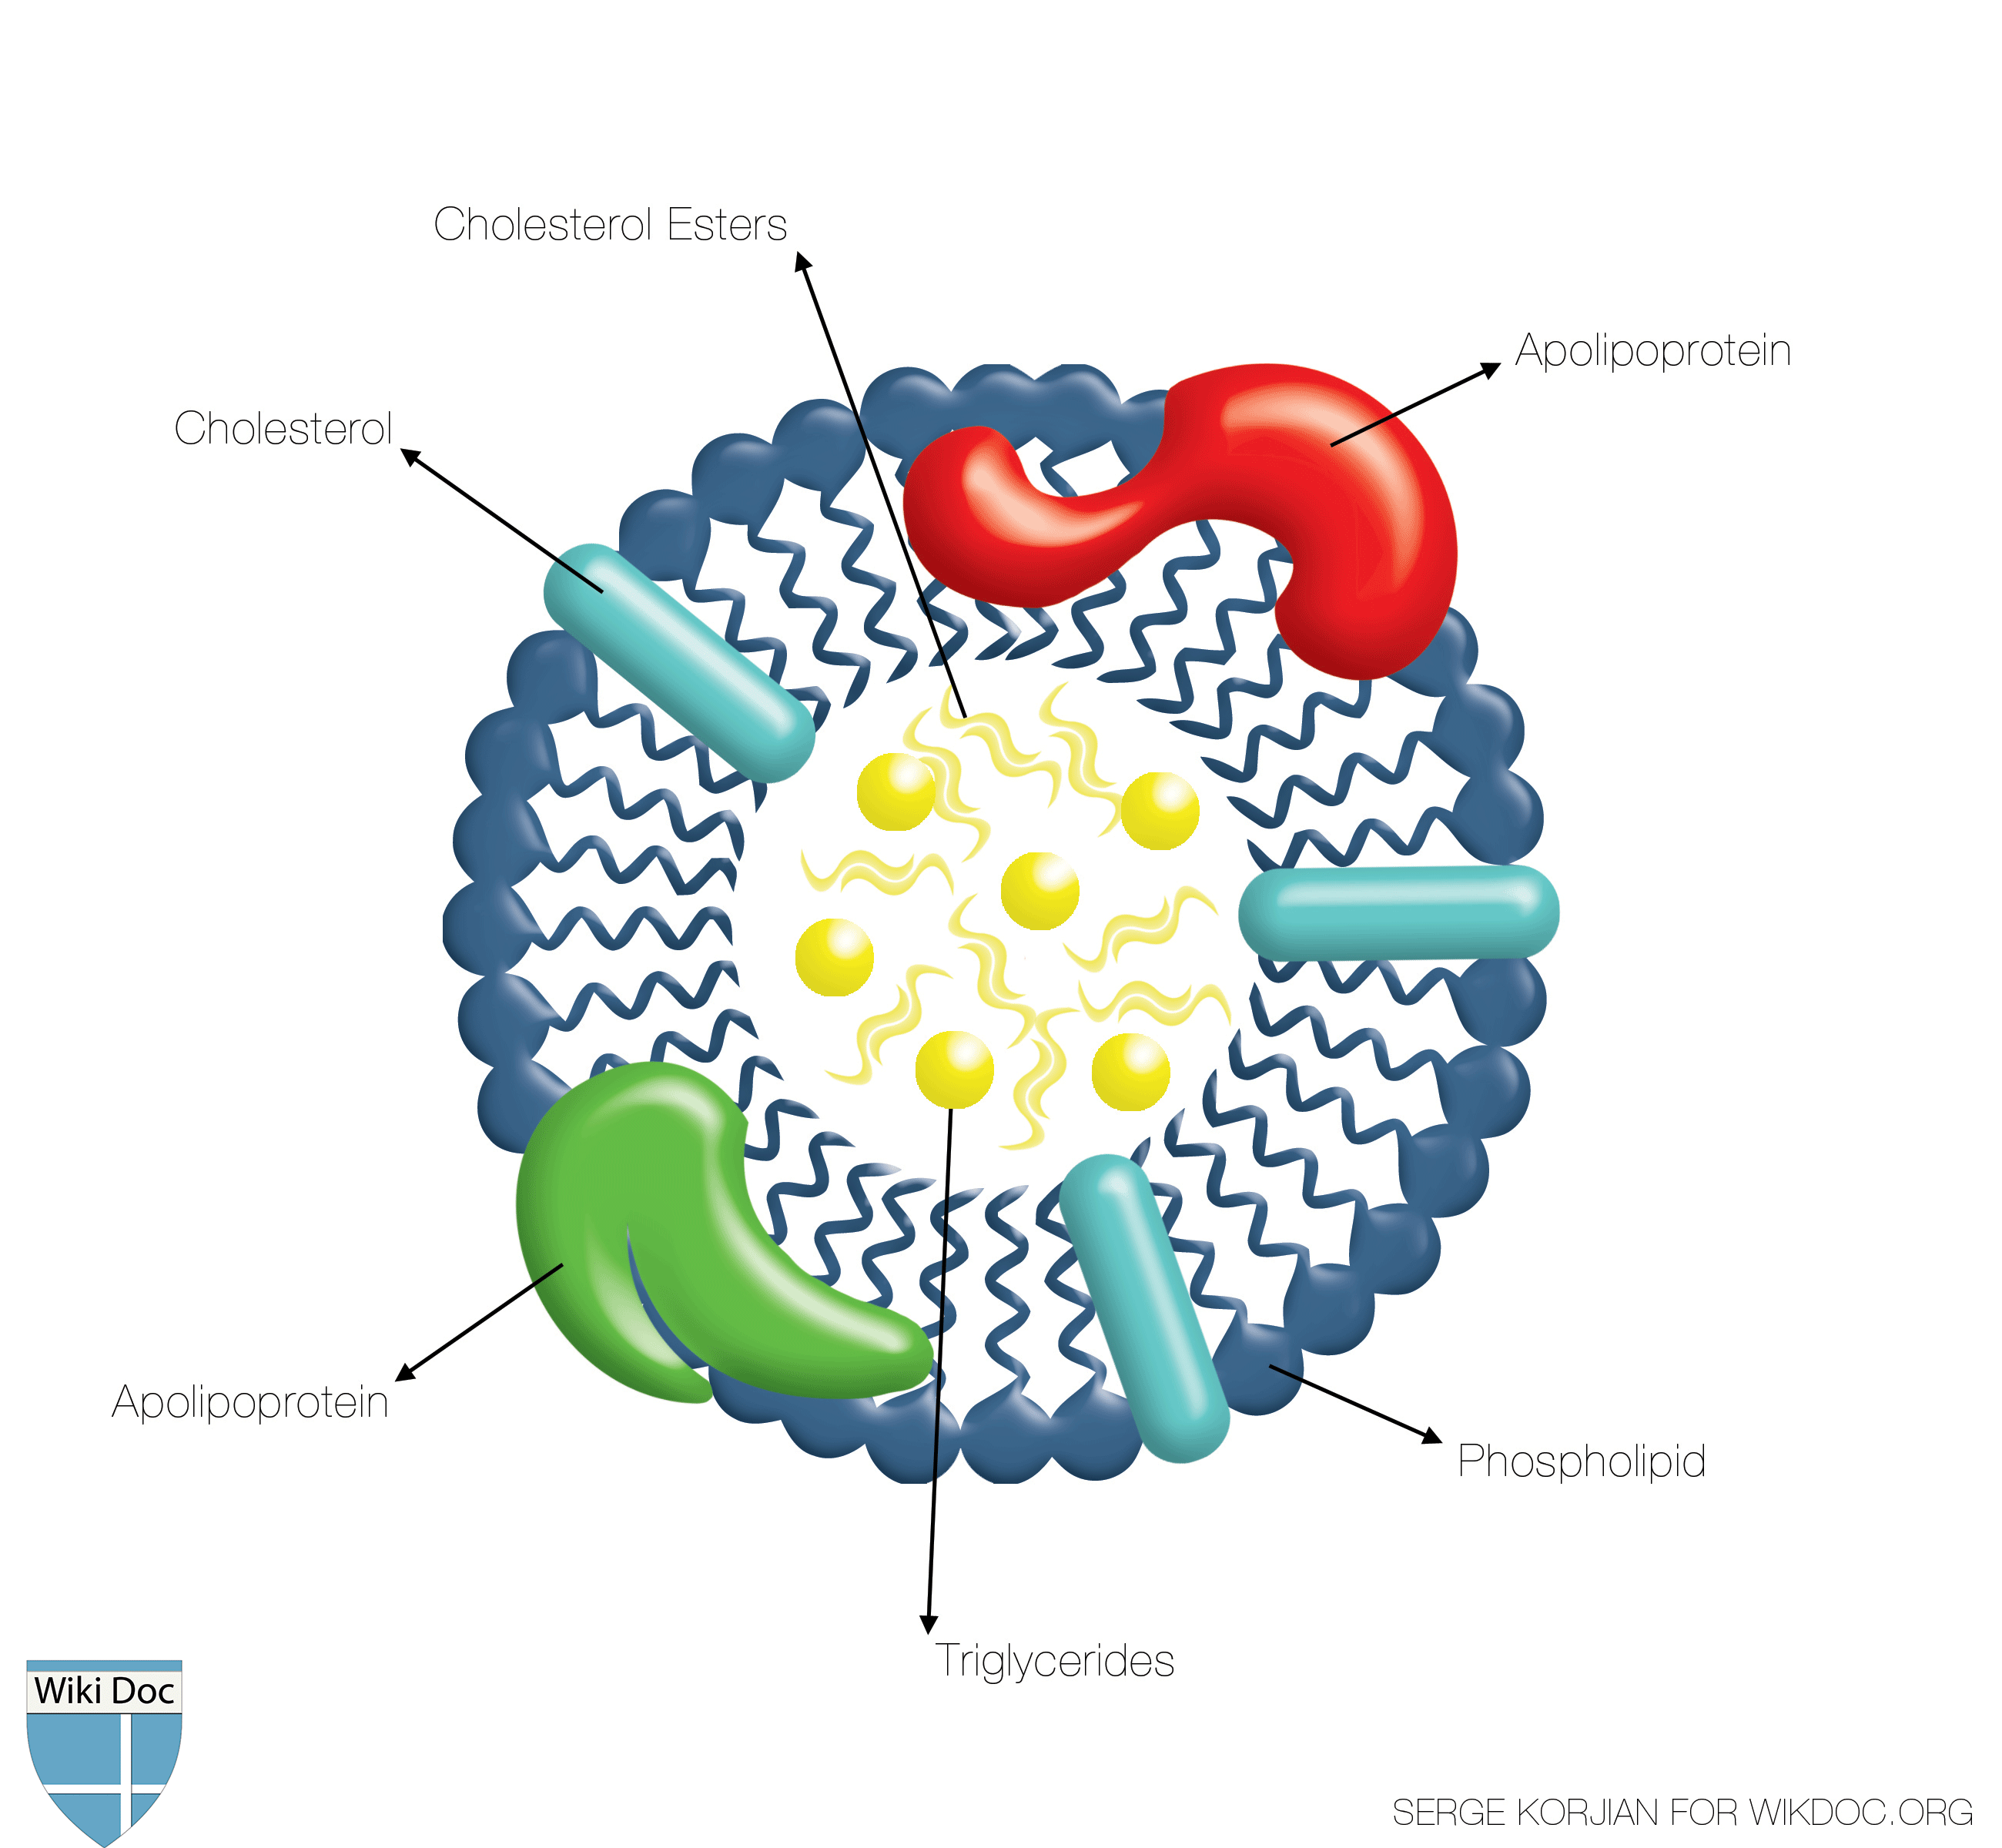 The structure of the HDL: the inner core is made of triglyceride and cholesterol esters whereas the surface is made of amphiphilic phospholipids along with apolipoproteins.